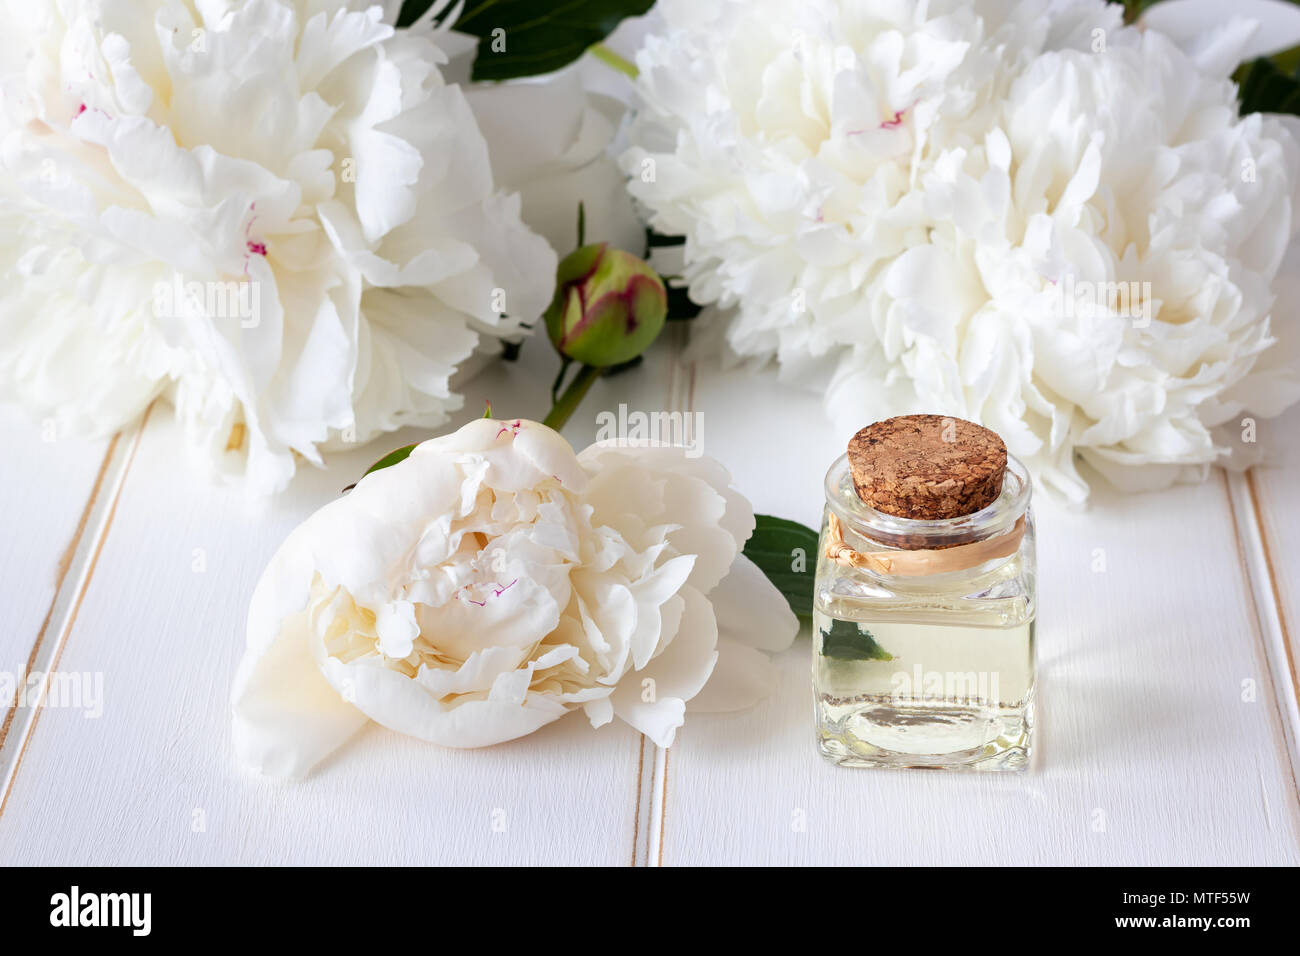 A bottle of essential oil with fresh white peony flowers in the background  Stock Photo - Alamy